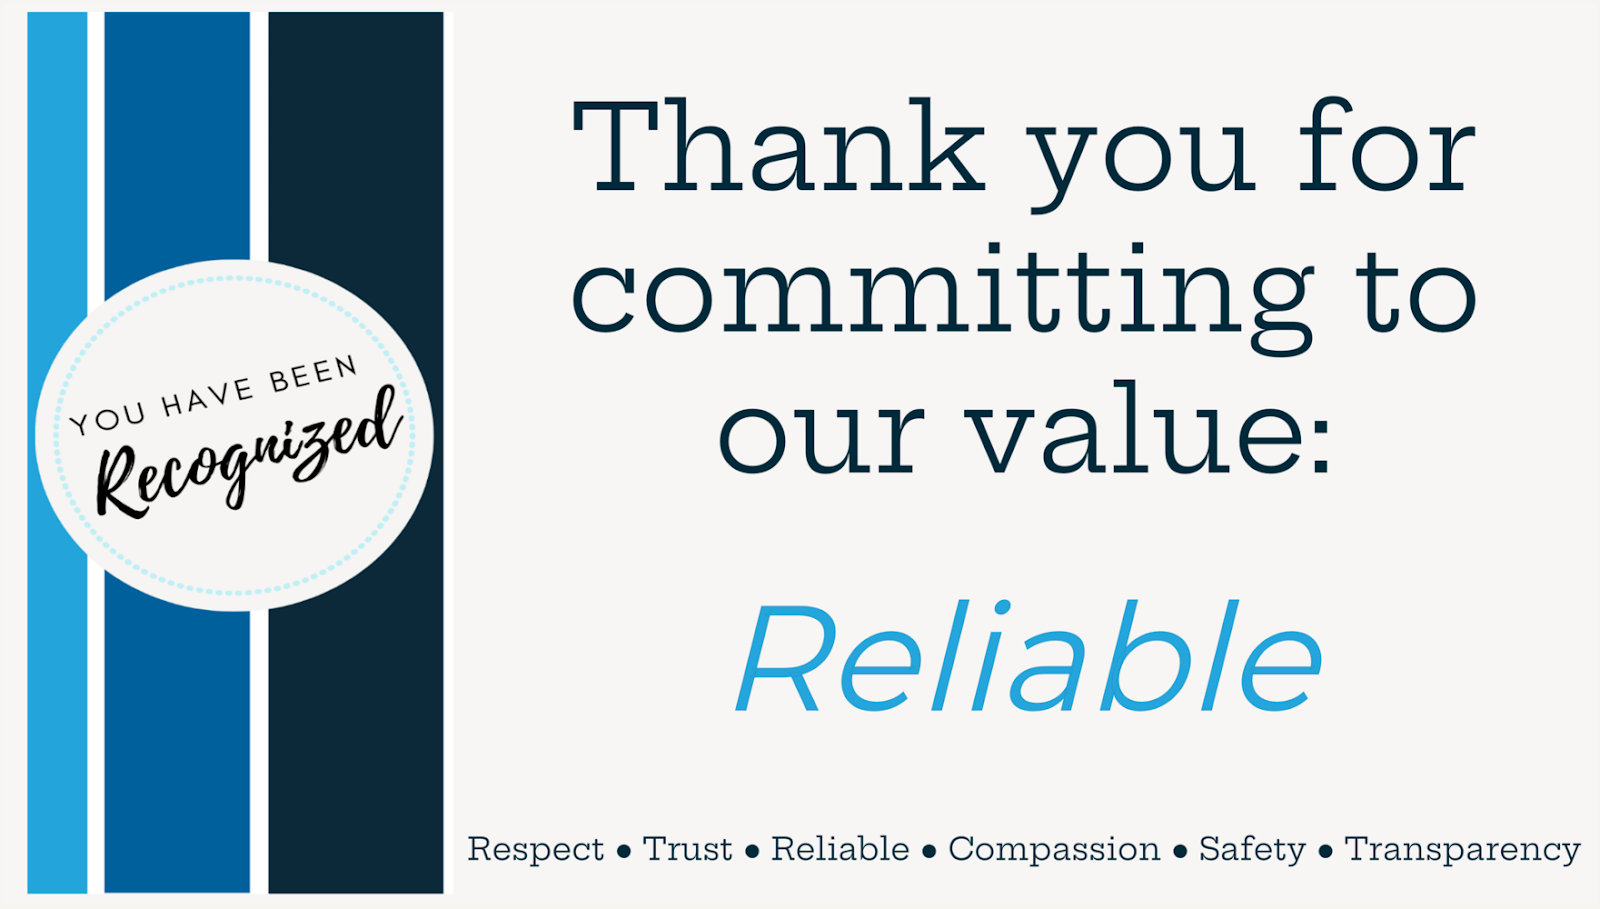 An eCard from Modivcare that says: Thank you for committing to our value: Reliable.